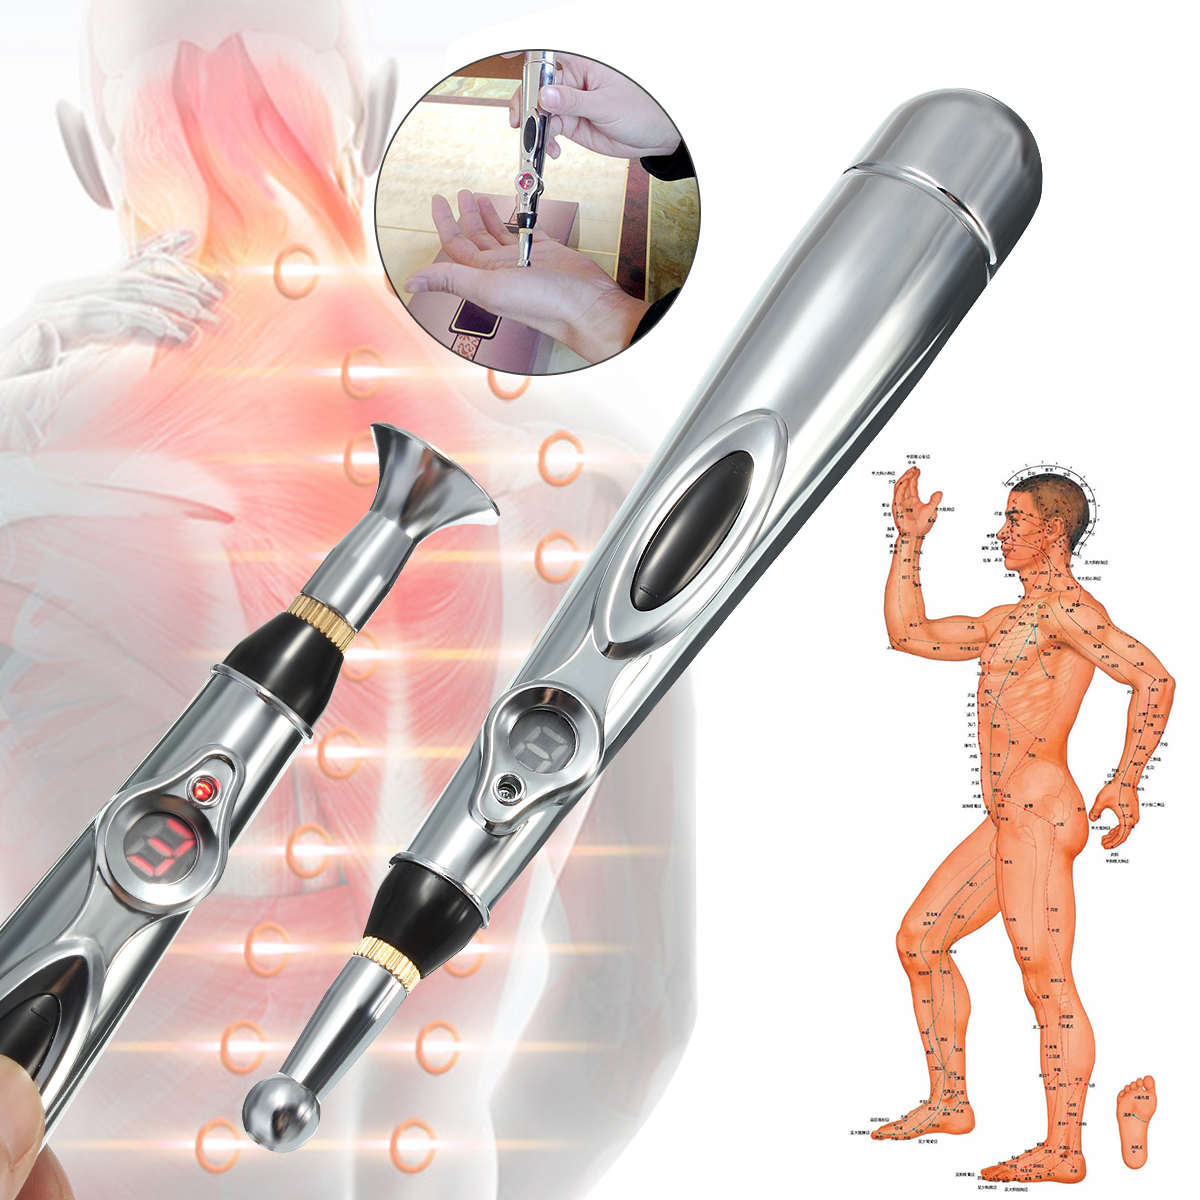 Portable-Electric-Massager-Acupuncture-Meridian-Energy-Health-Pen-Kit-Heal-Massage-Pain-1278138-1